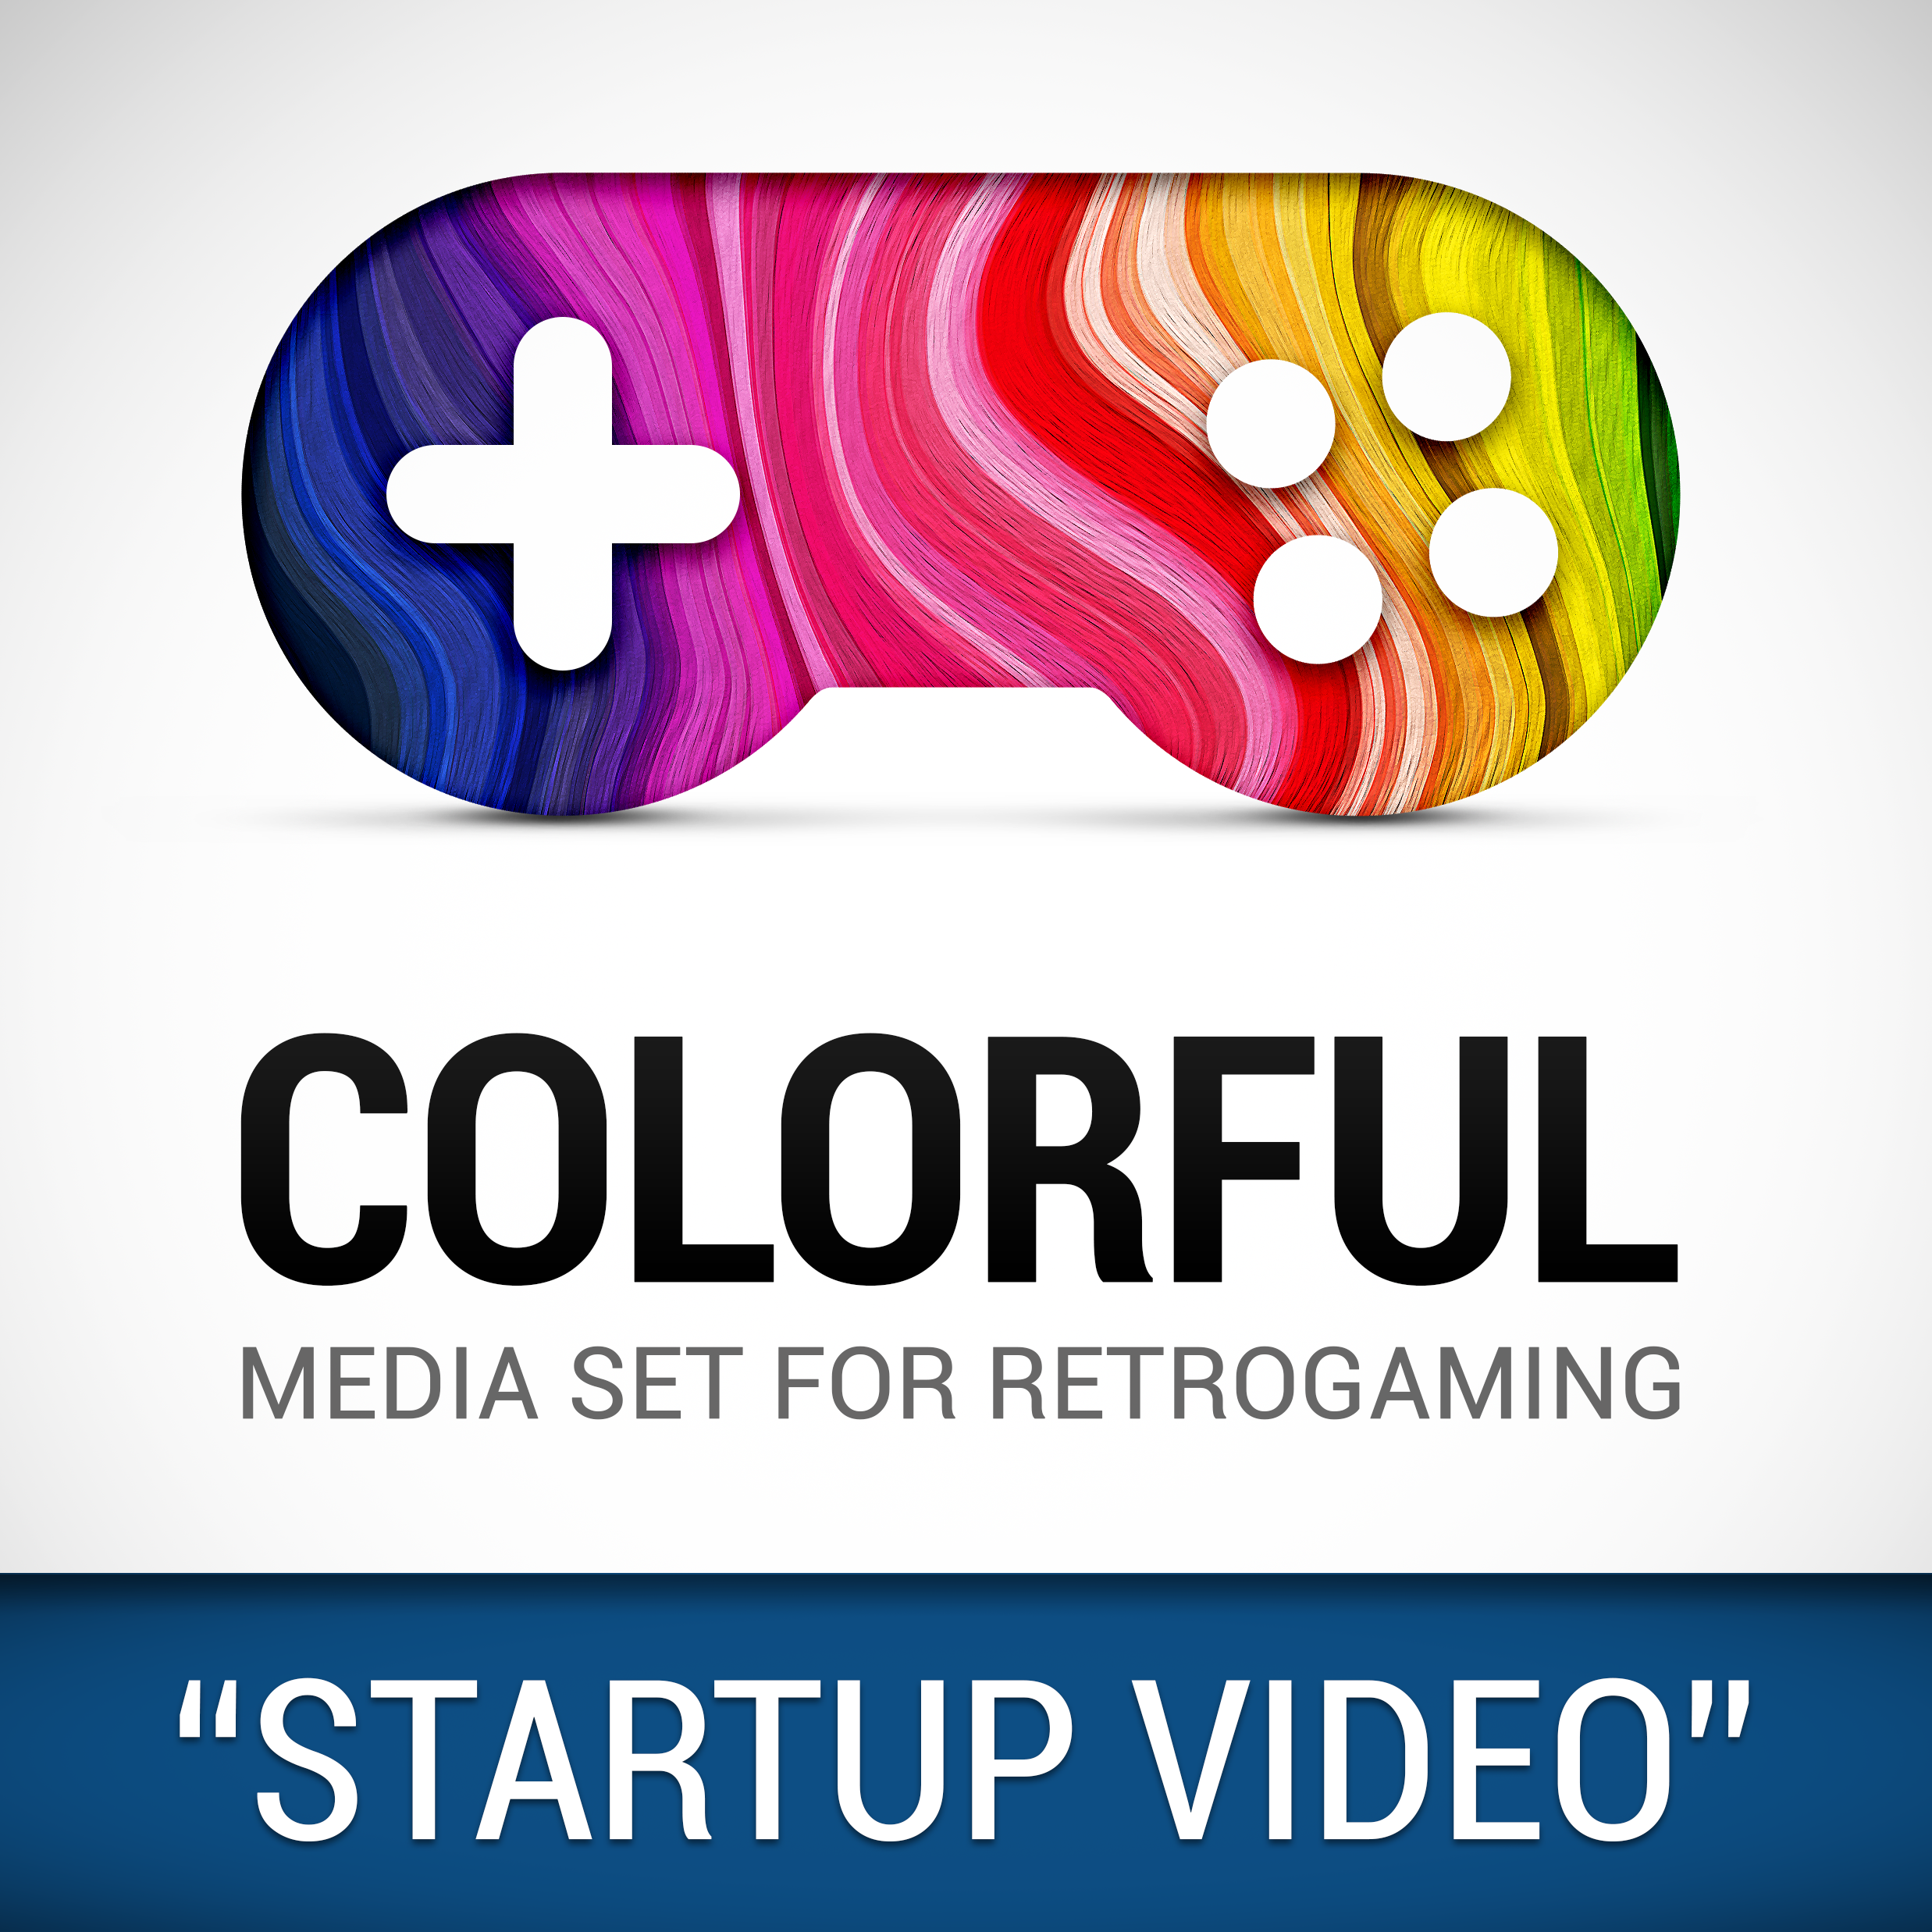 More information about "COLORFUL BigBox Startup Video"